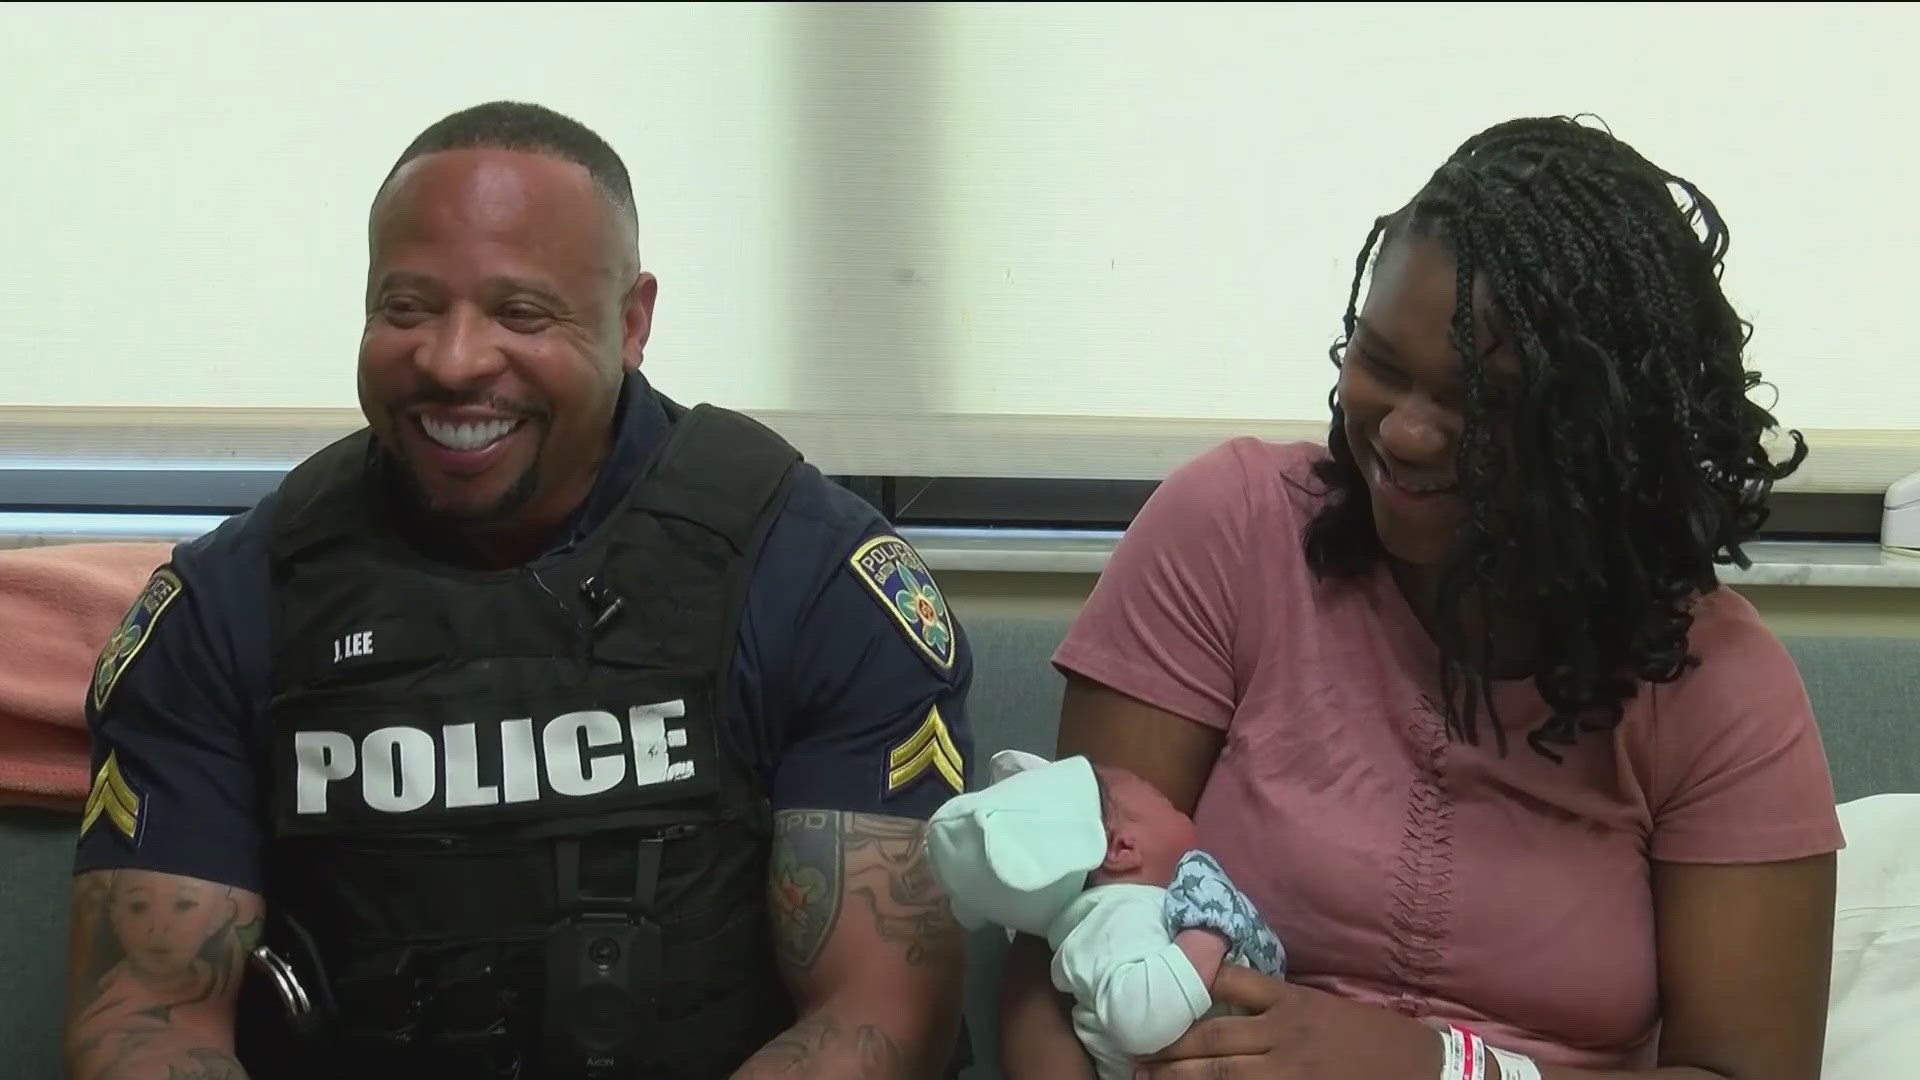 One police department in Louisiana received a special delivery they were not expecting.